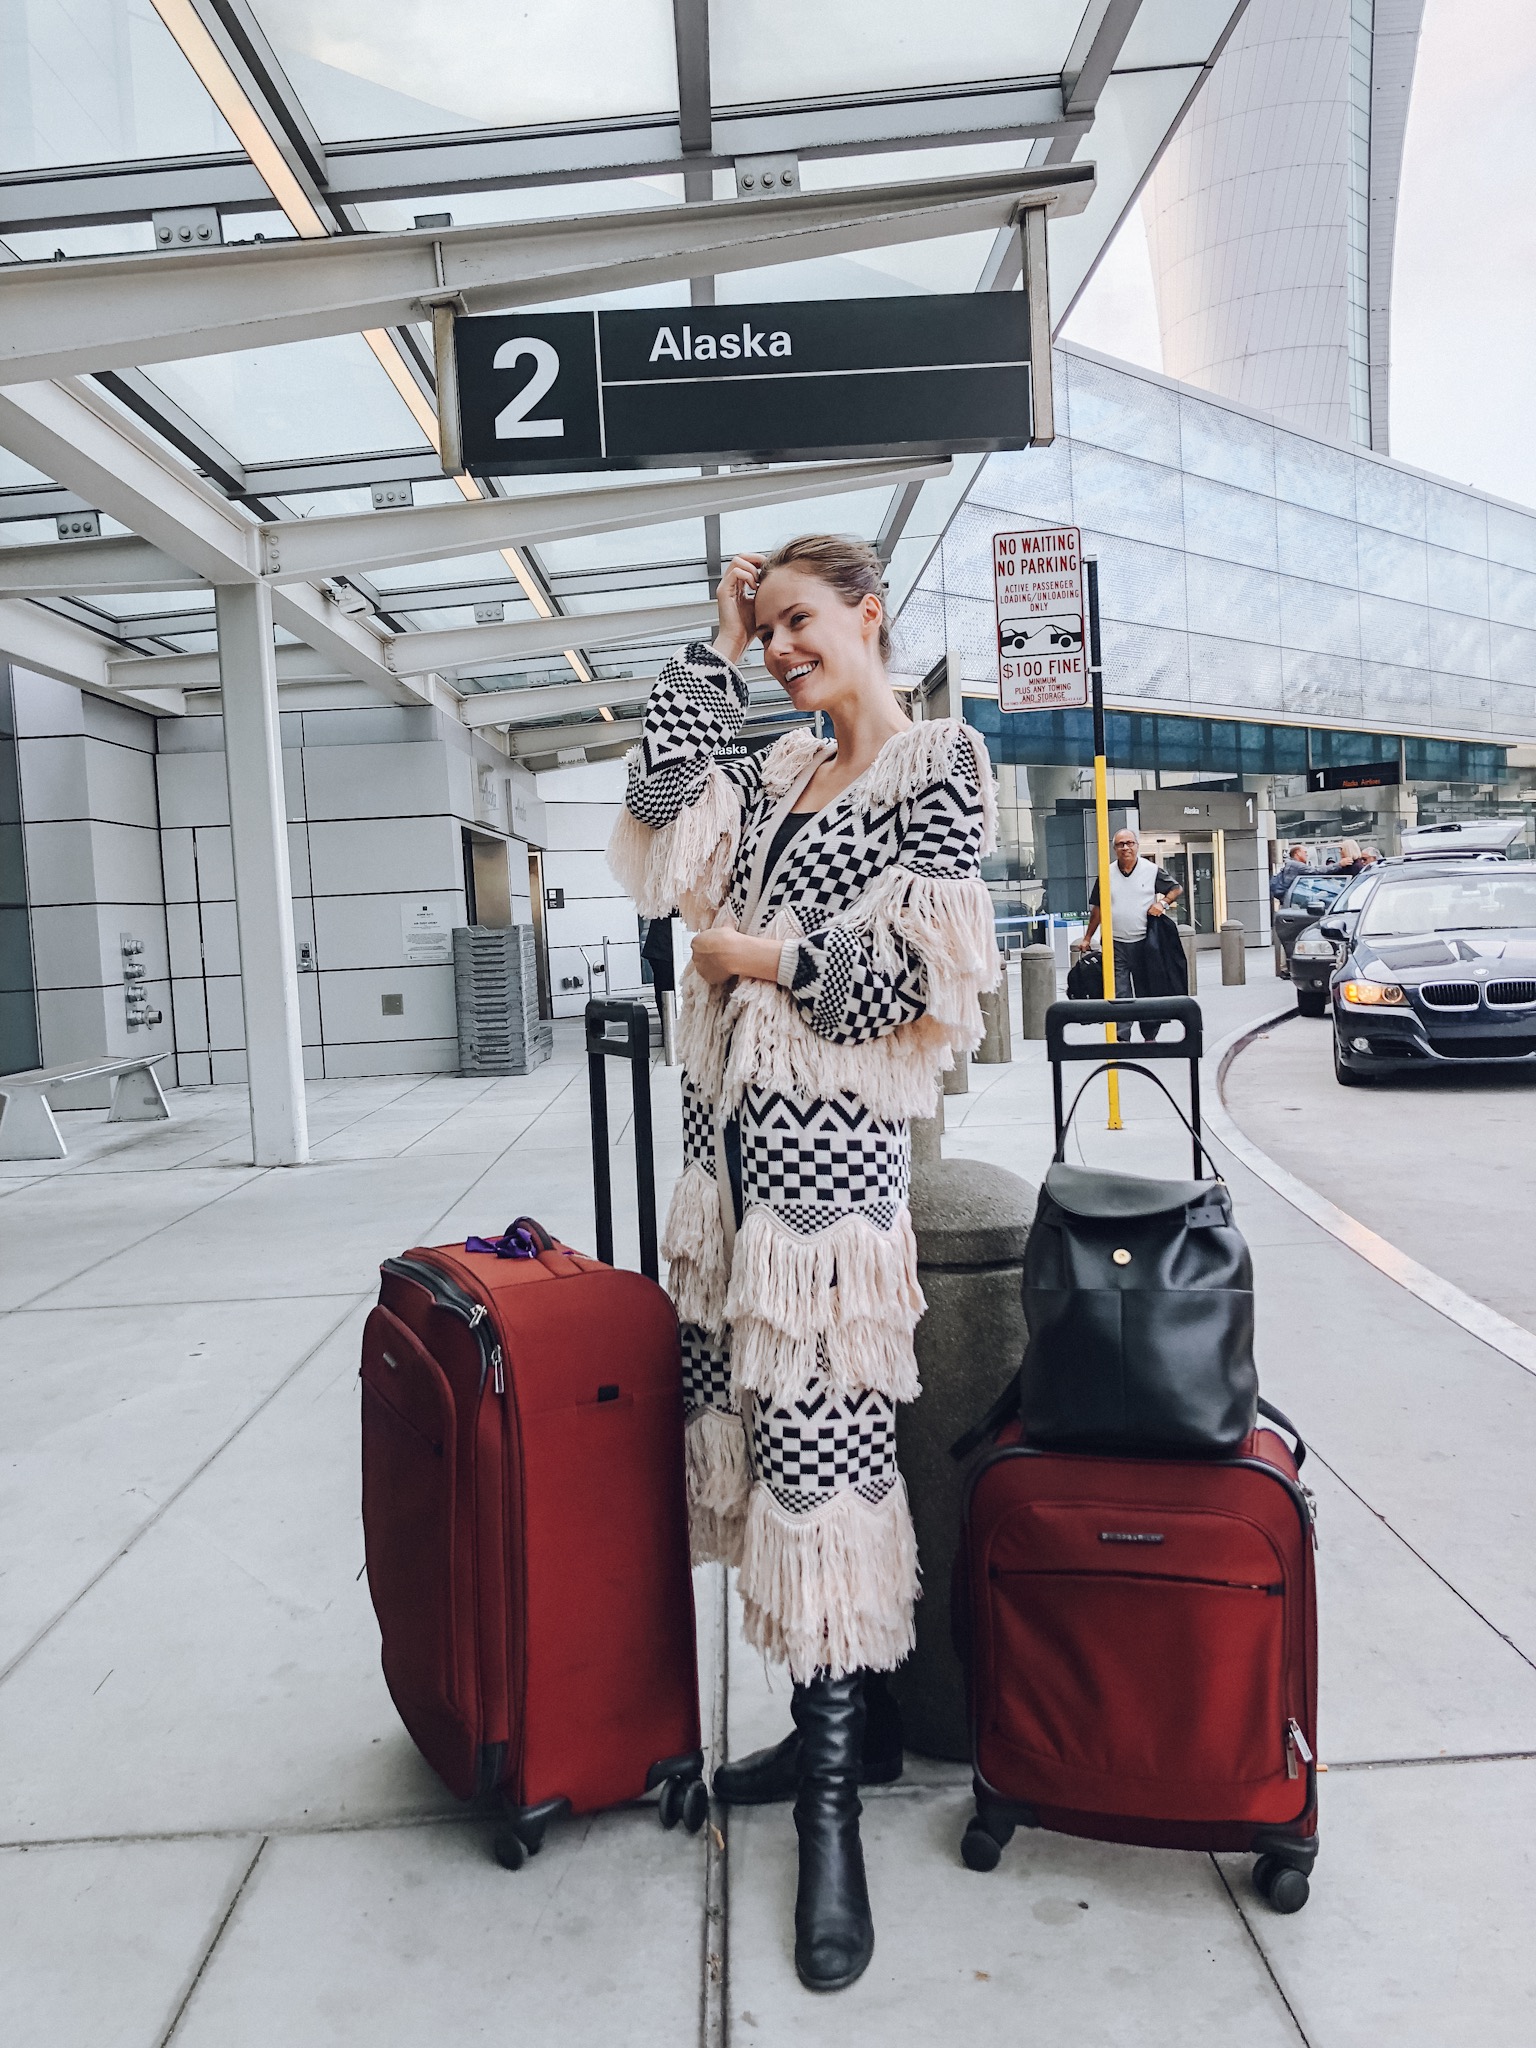 Alyssa Campanella of The A List blog travels to San Francisco with Alaska Airlines and Shopstyle wearing House of Harlow Ash Duster cardigan